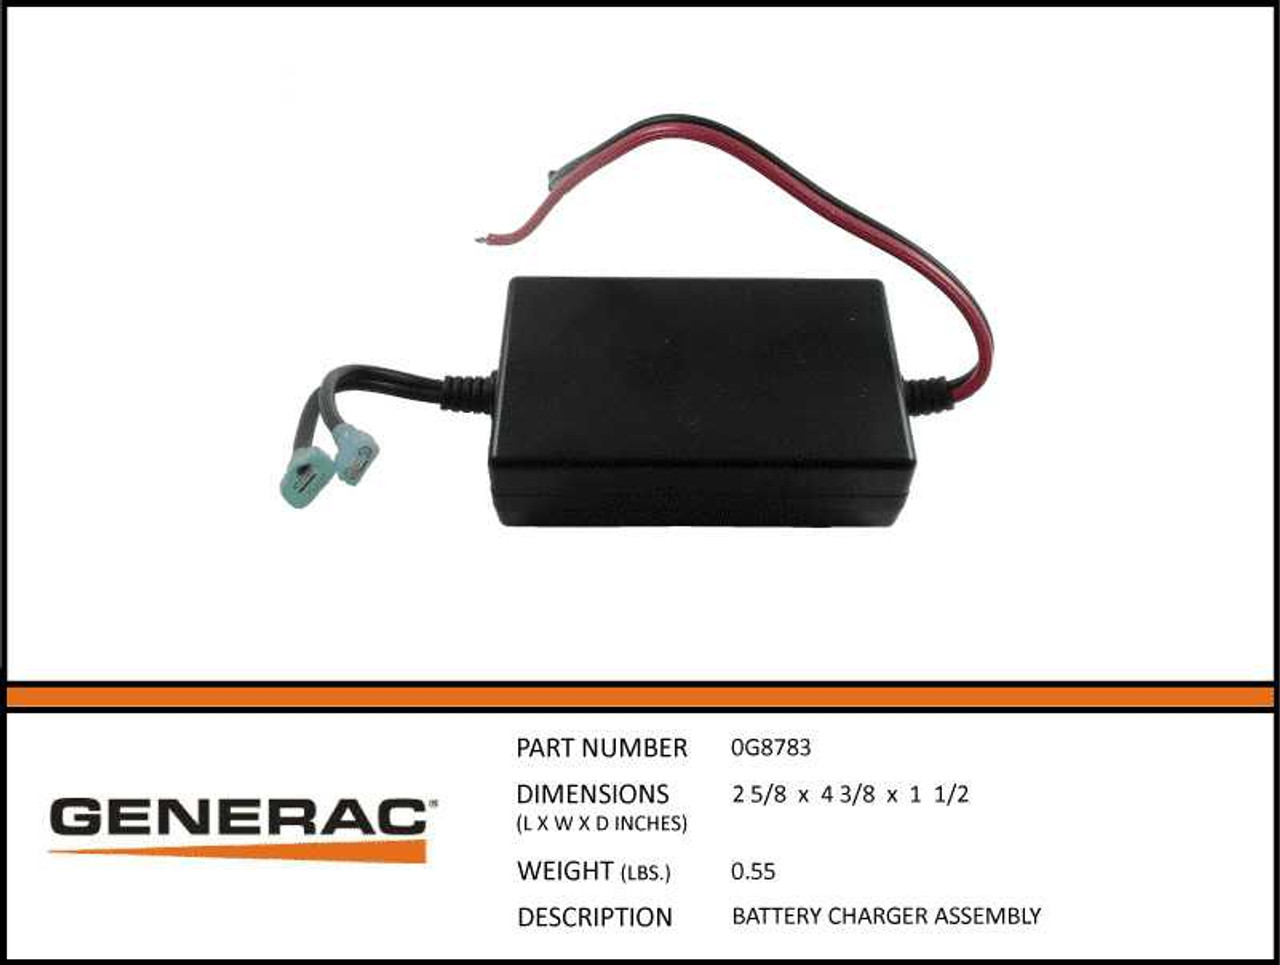 Generac 0G8783 Battery Charger Assembly for Generators